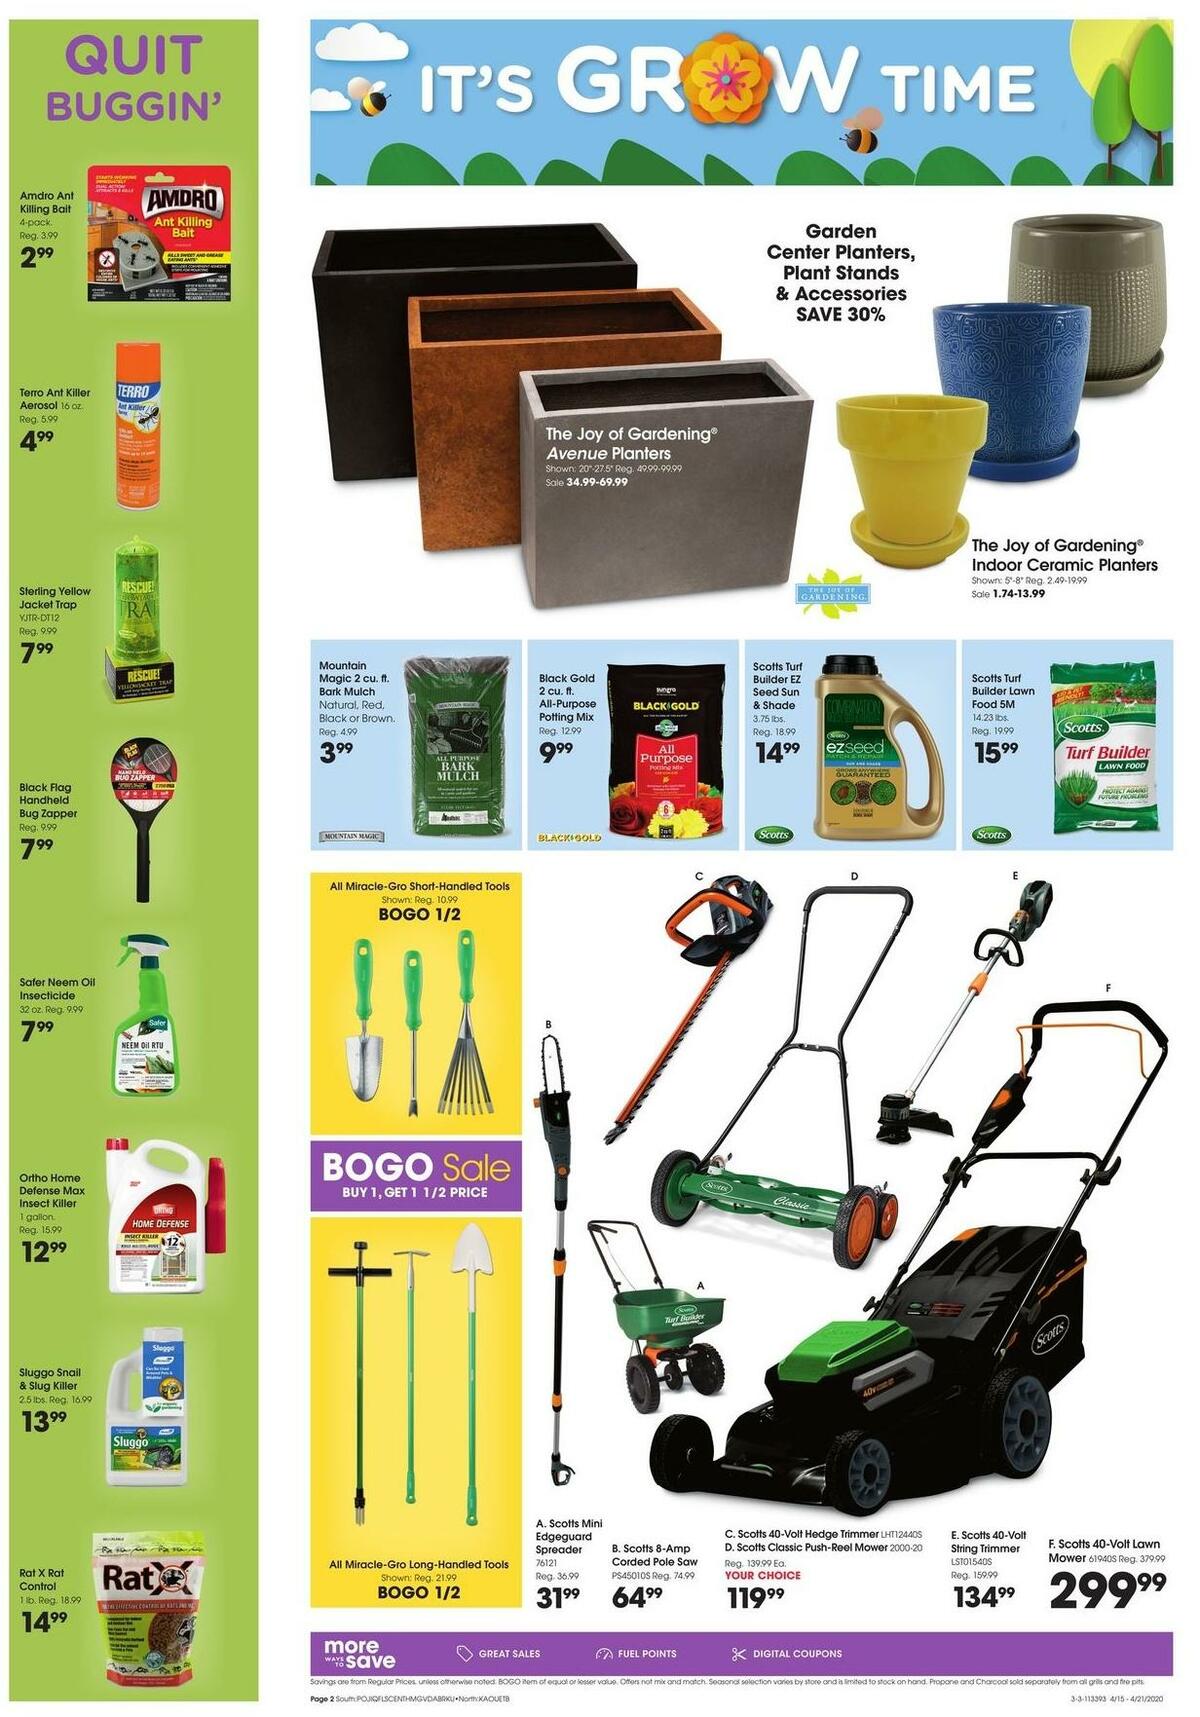 Fred Meyer Garden Weekly Ad & Specials from April 15 Page 2